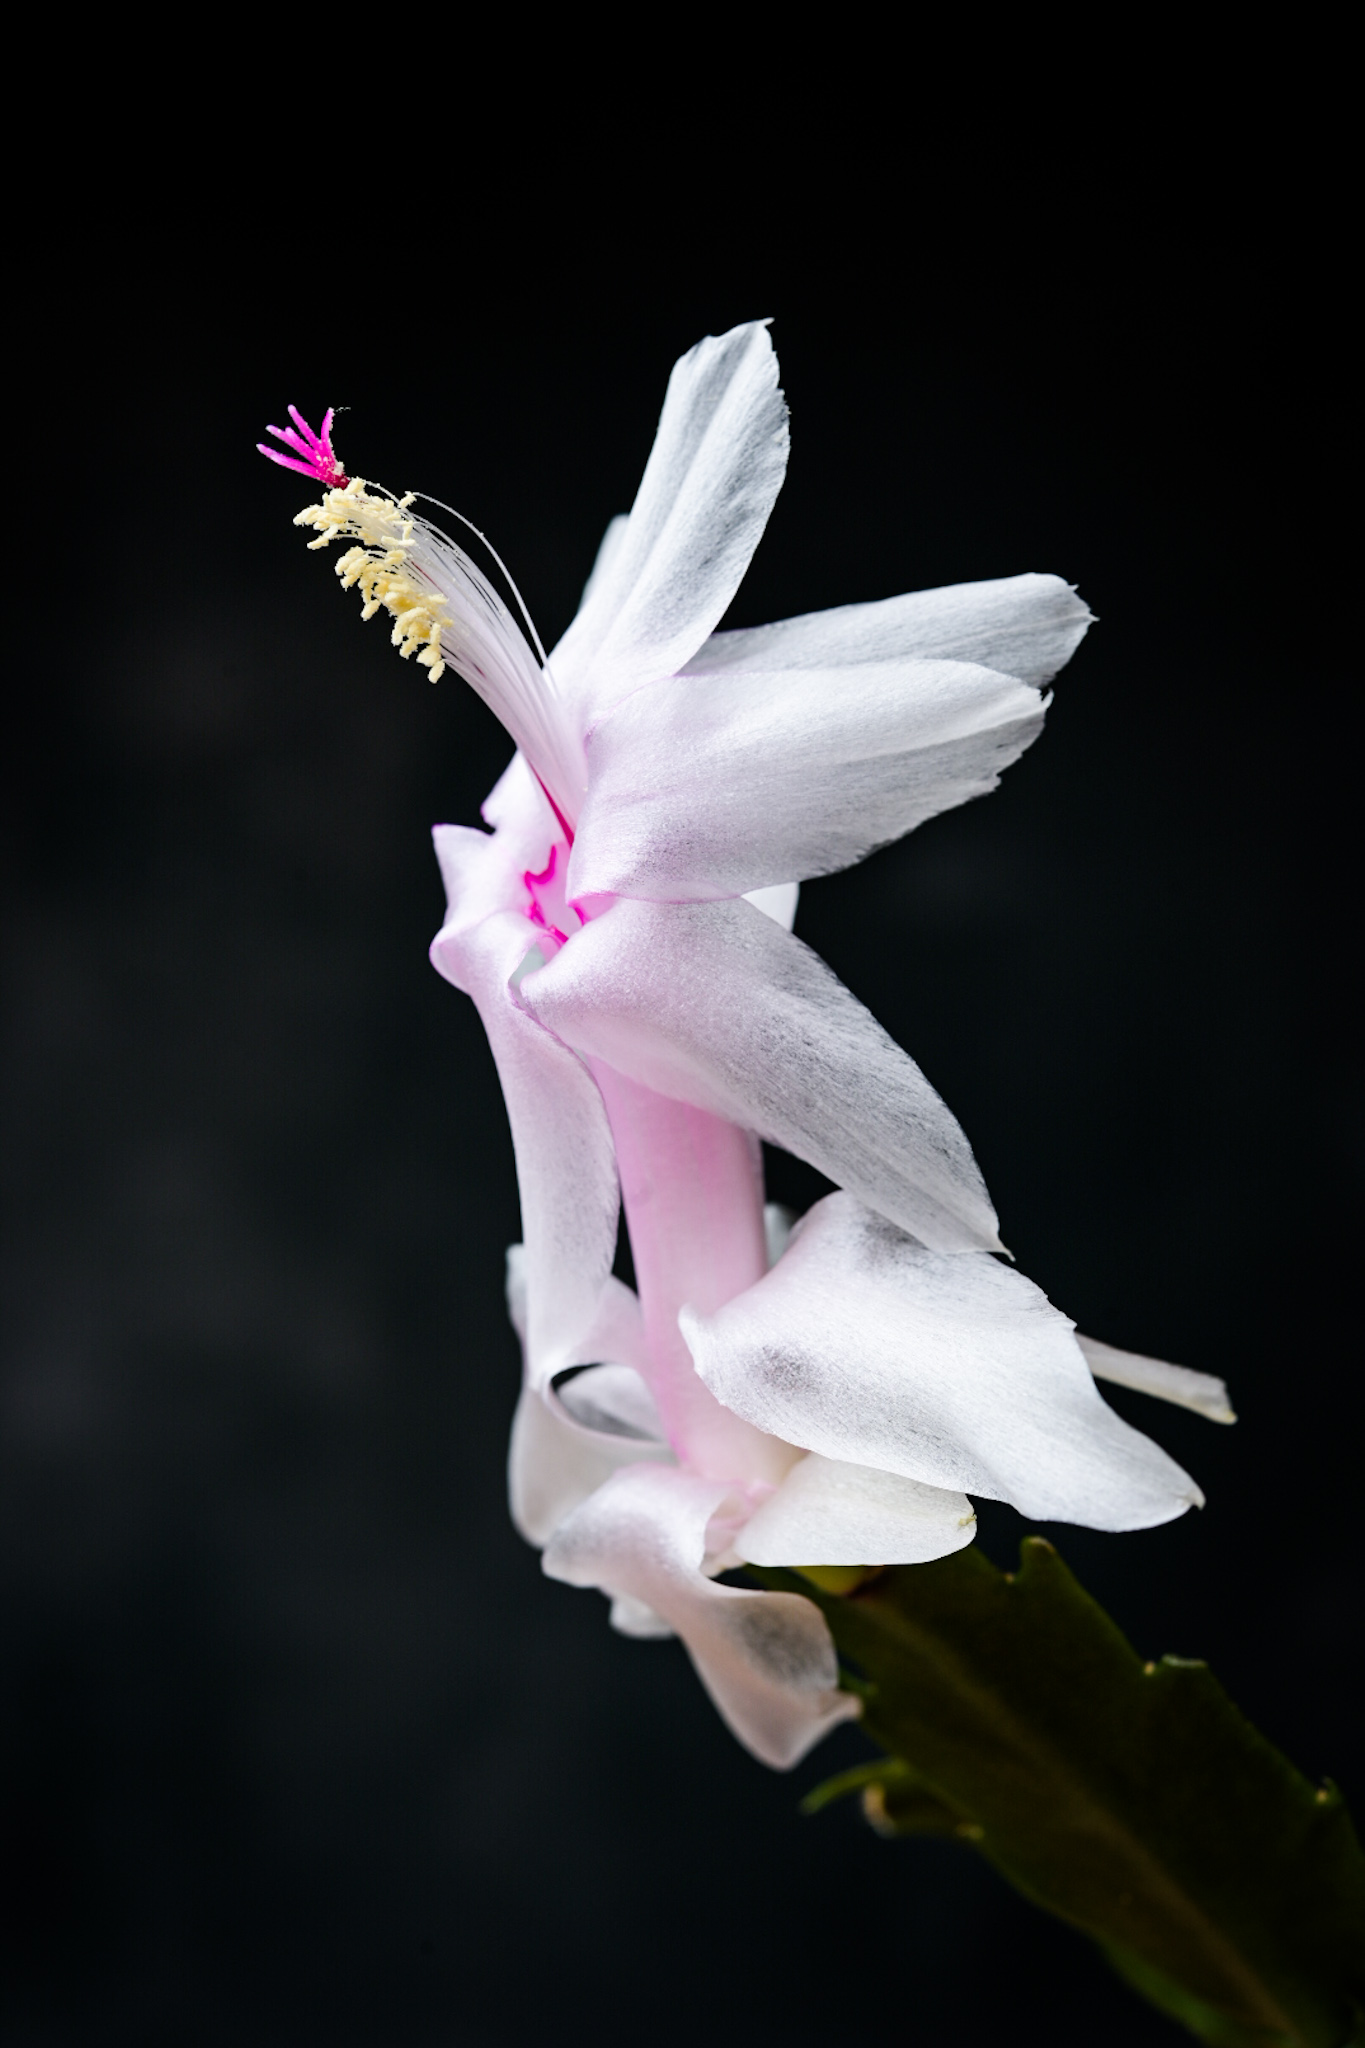 Portrait of a blossom from a Christmas cactus (Schlumbergera)